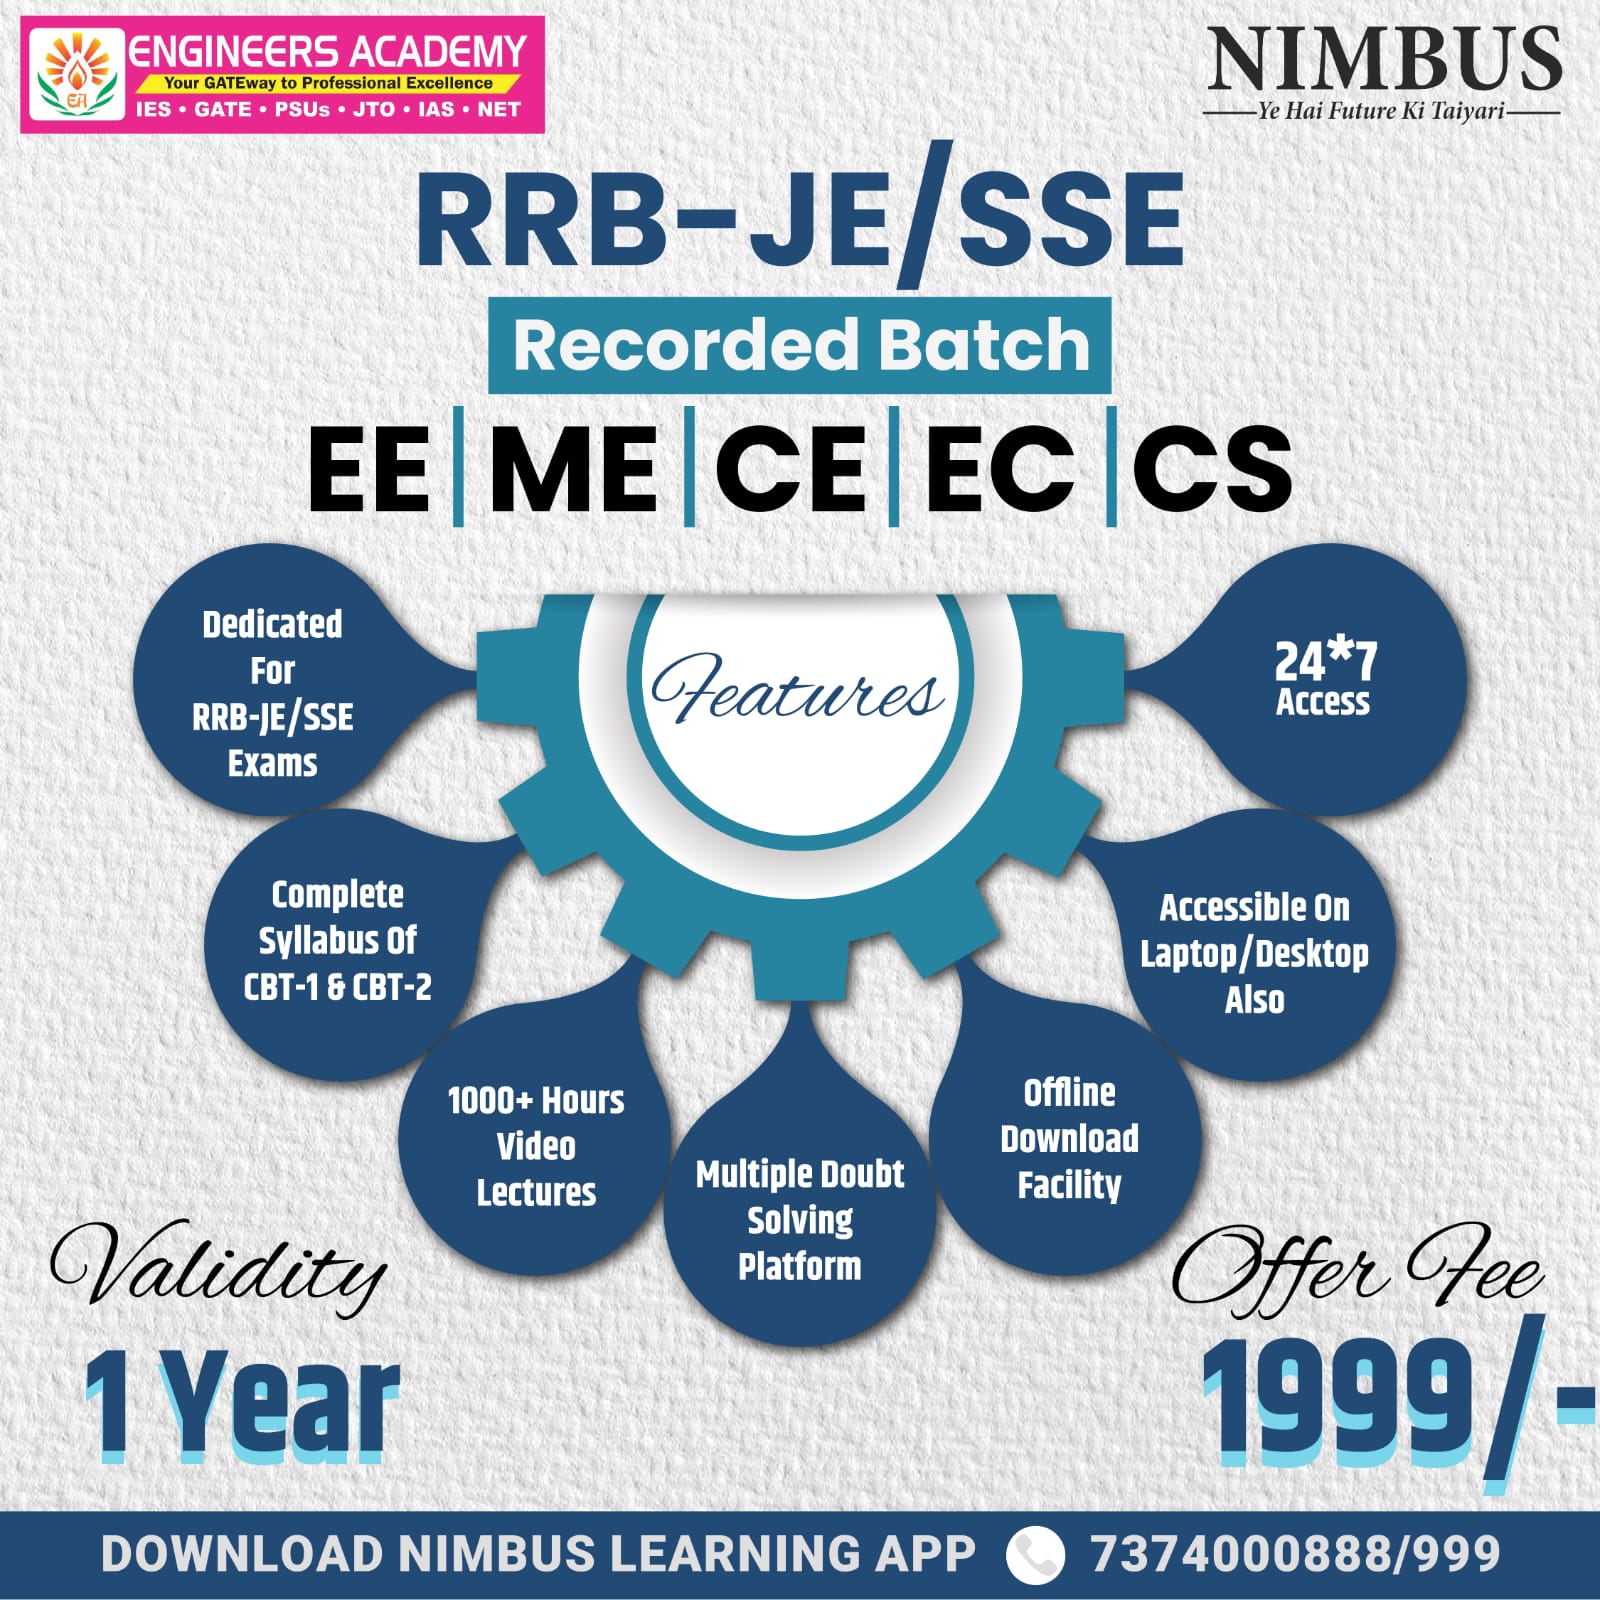 RRB JE SSE Recorded Batch - EA